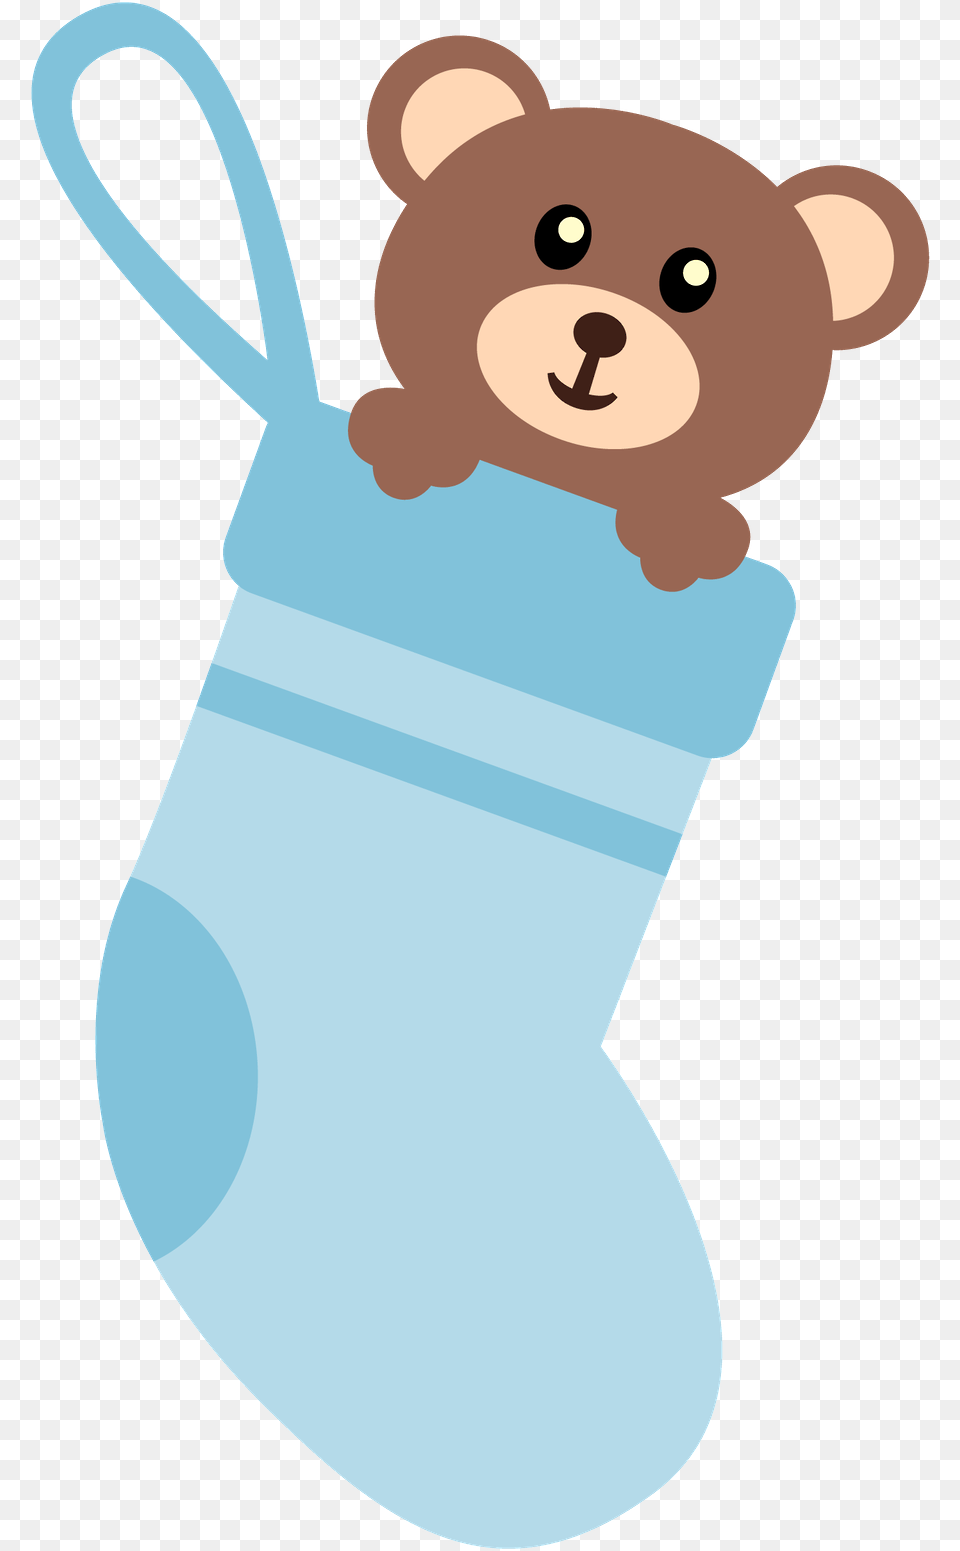 Bear Album Clip Art And Bears, Hosiery, Clothing, Christmas, Christmas Decorations Png Image